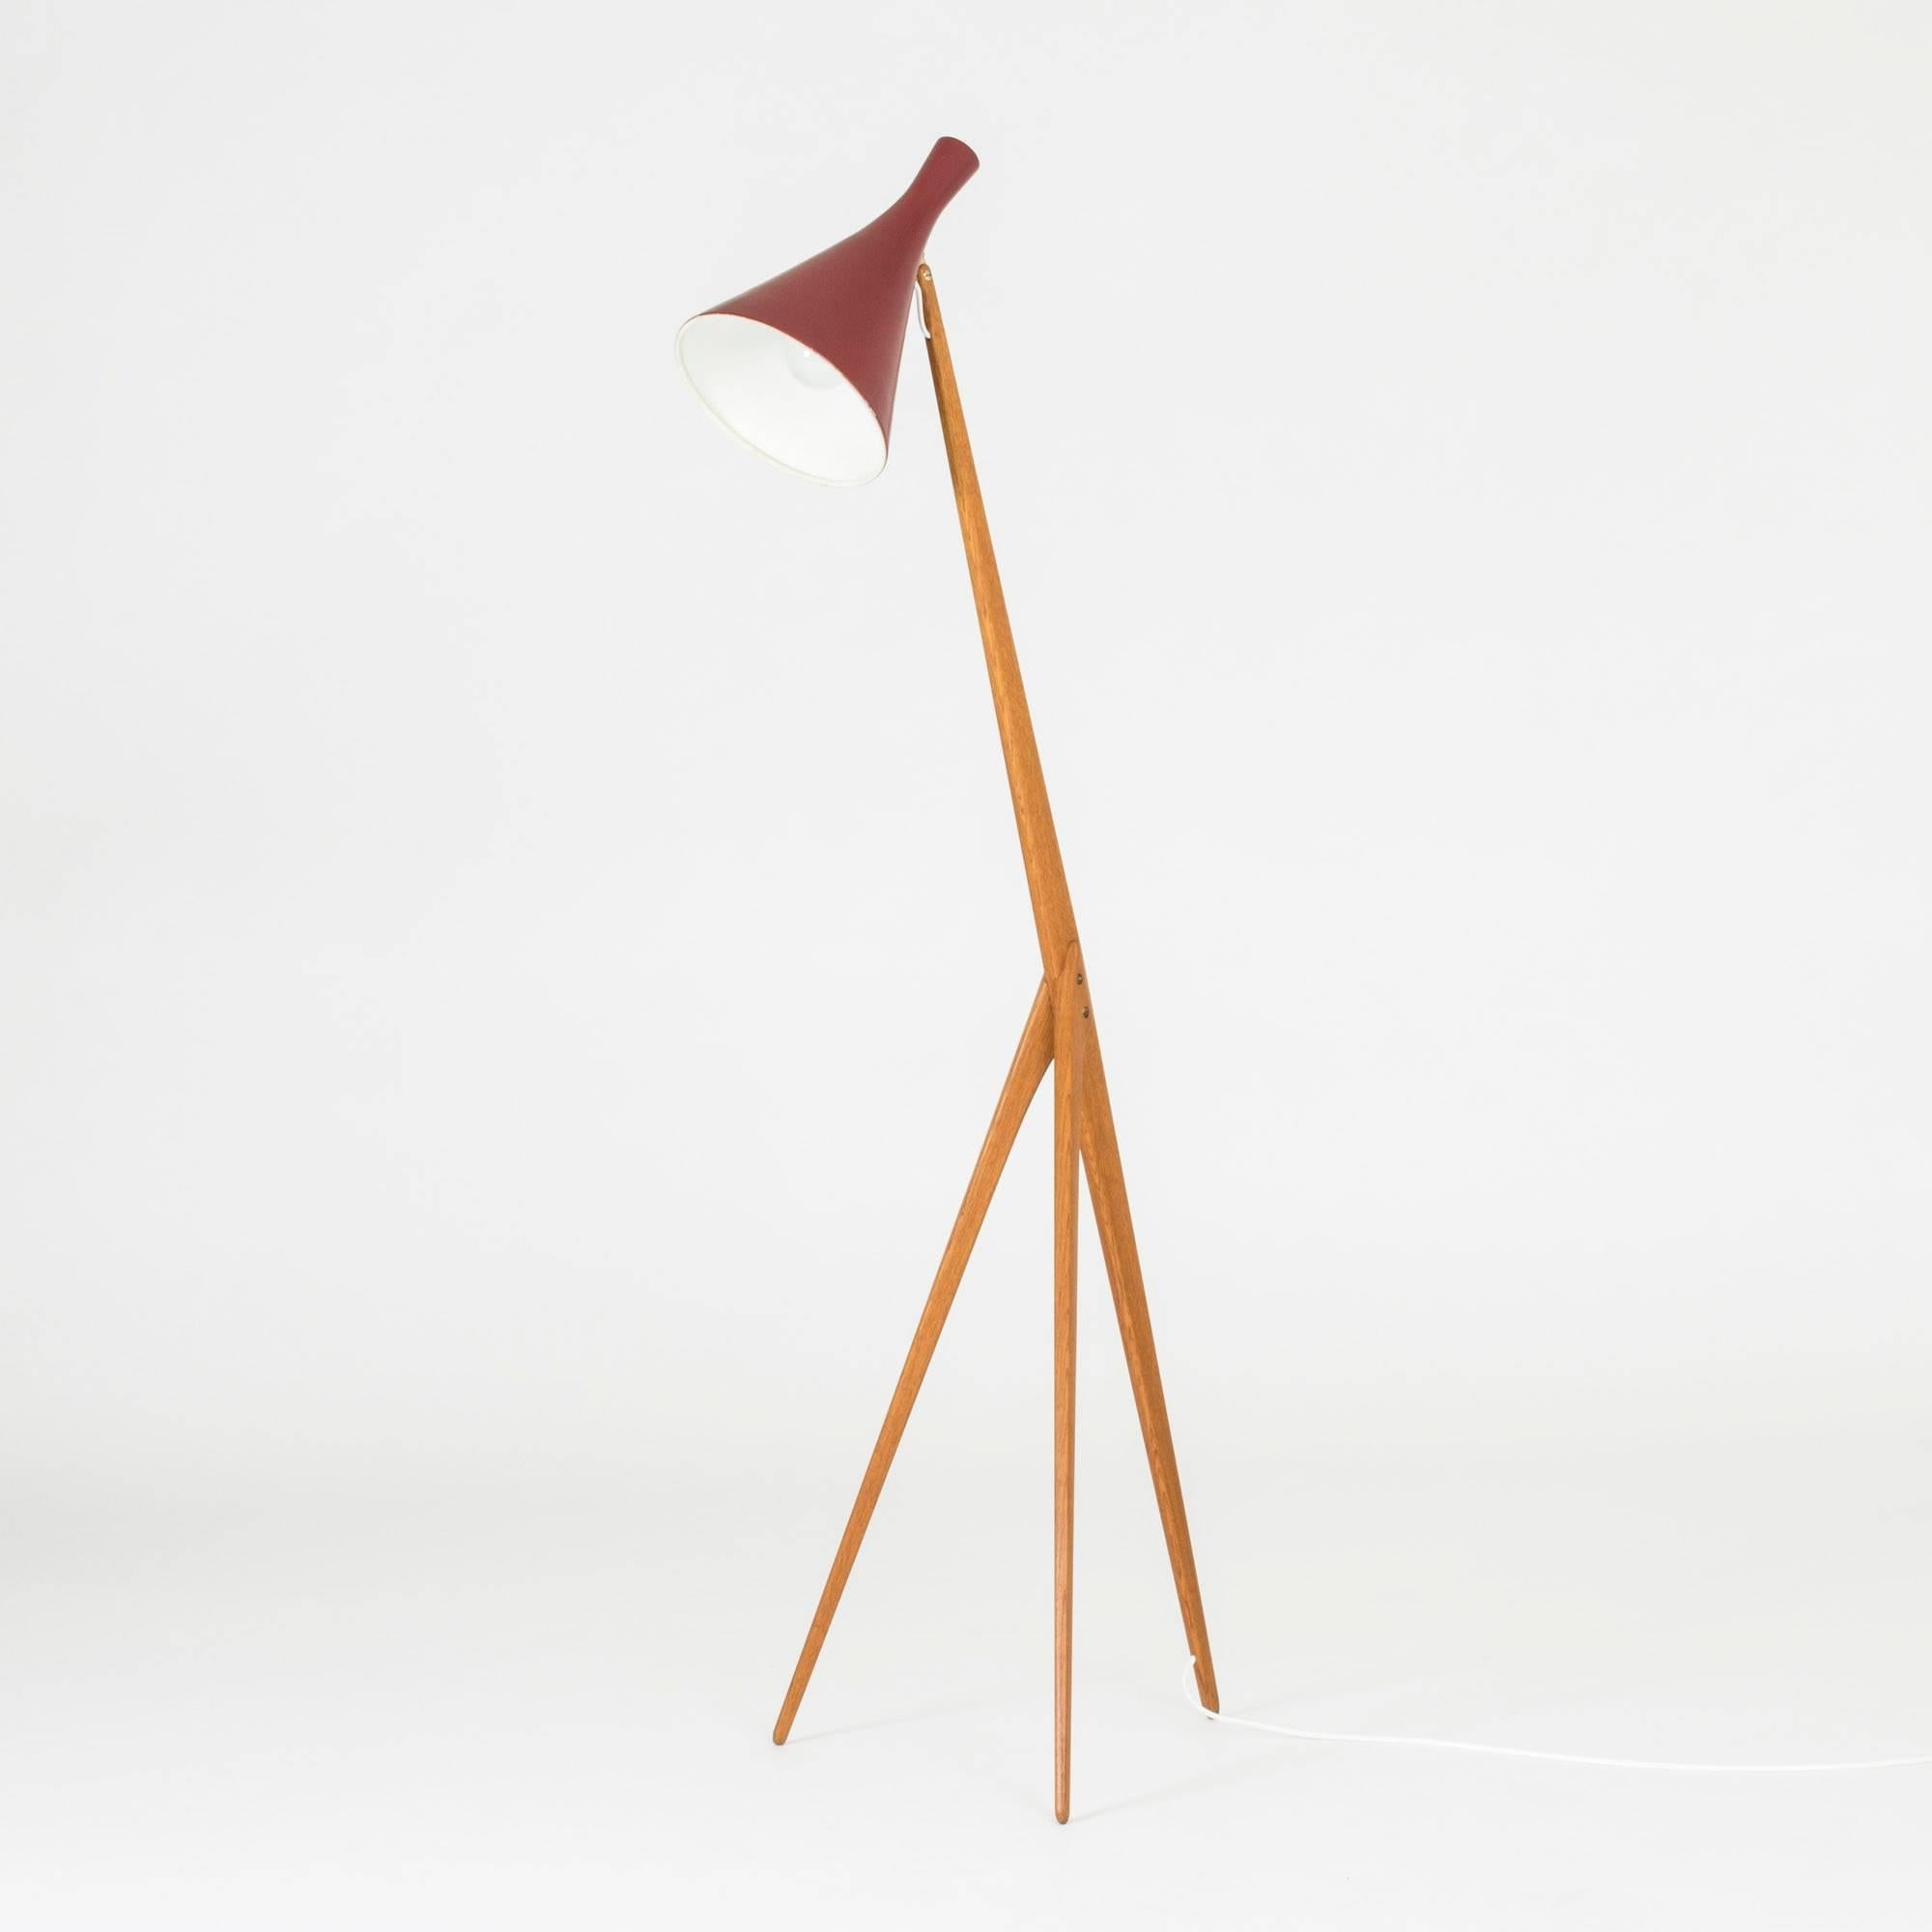 Amazing floor lamp by Uno and Östen Kristiansson, made from solid teak with a dark red lacquered shade and brass details. The electrical cord is fitted into a slit running down the length of the back leg.